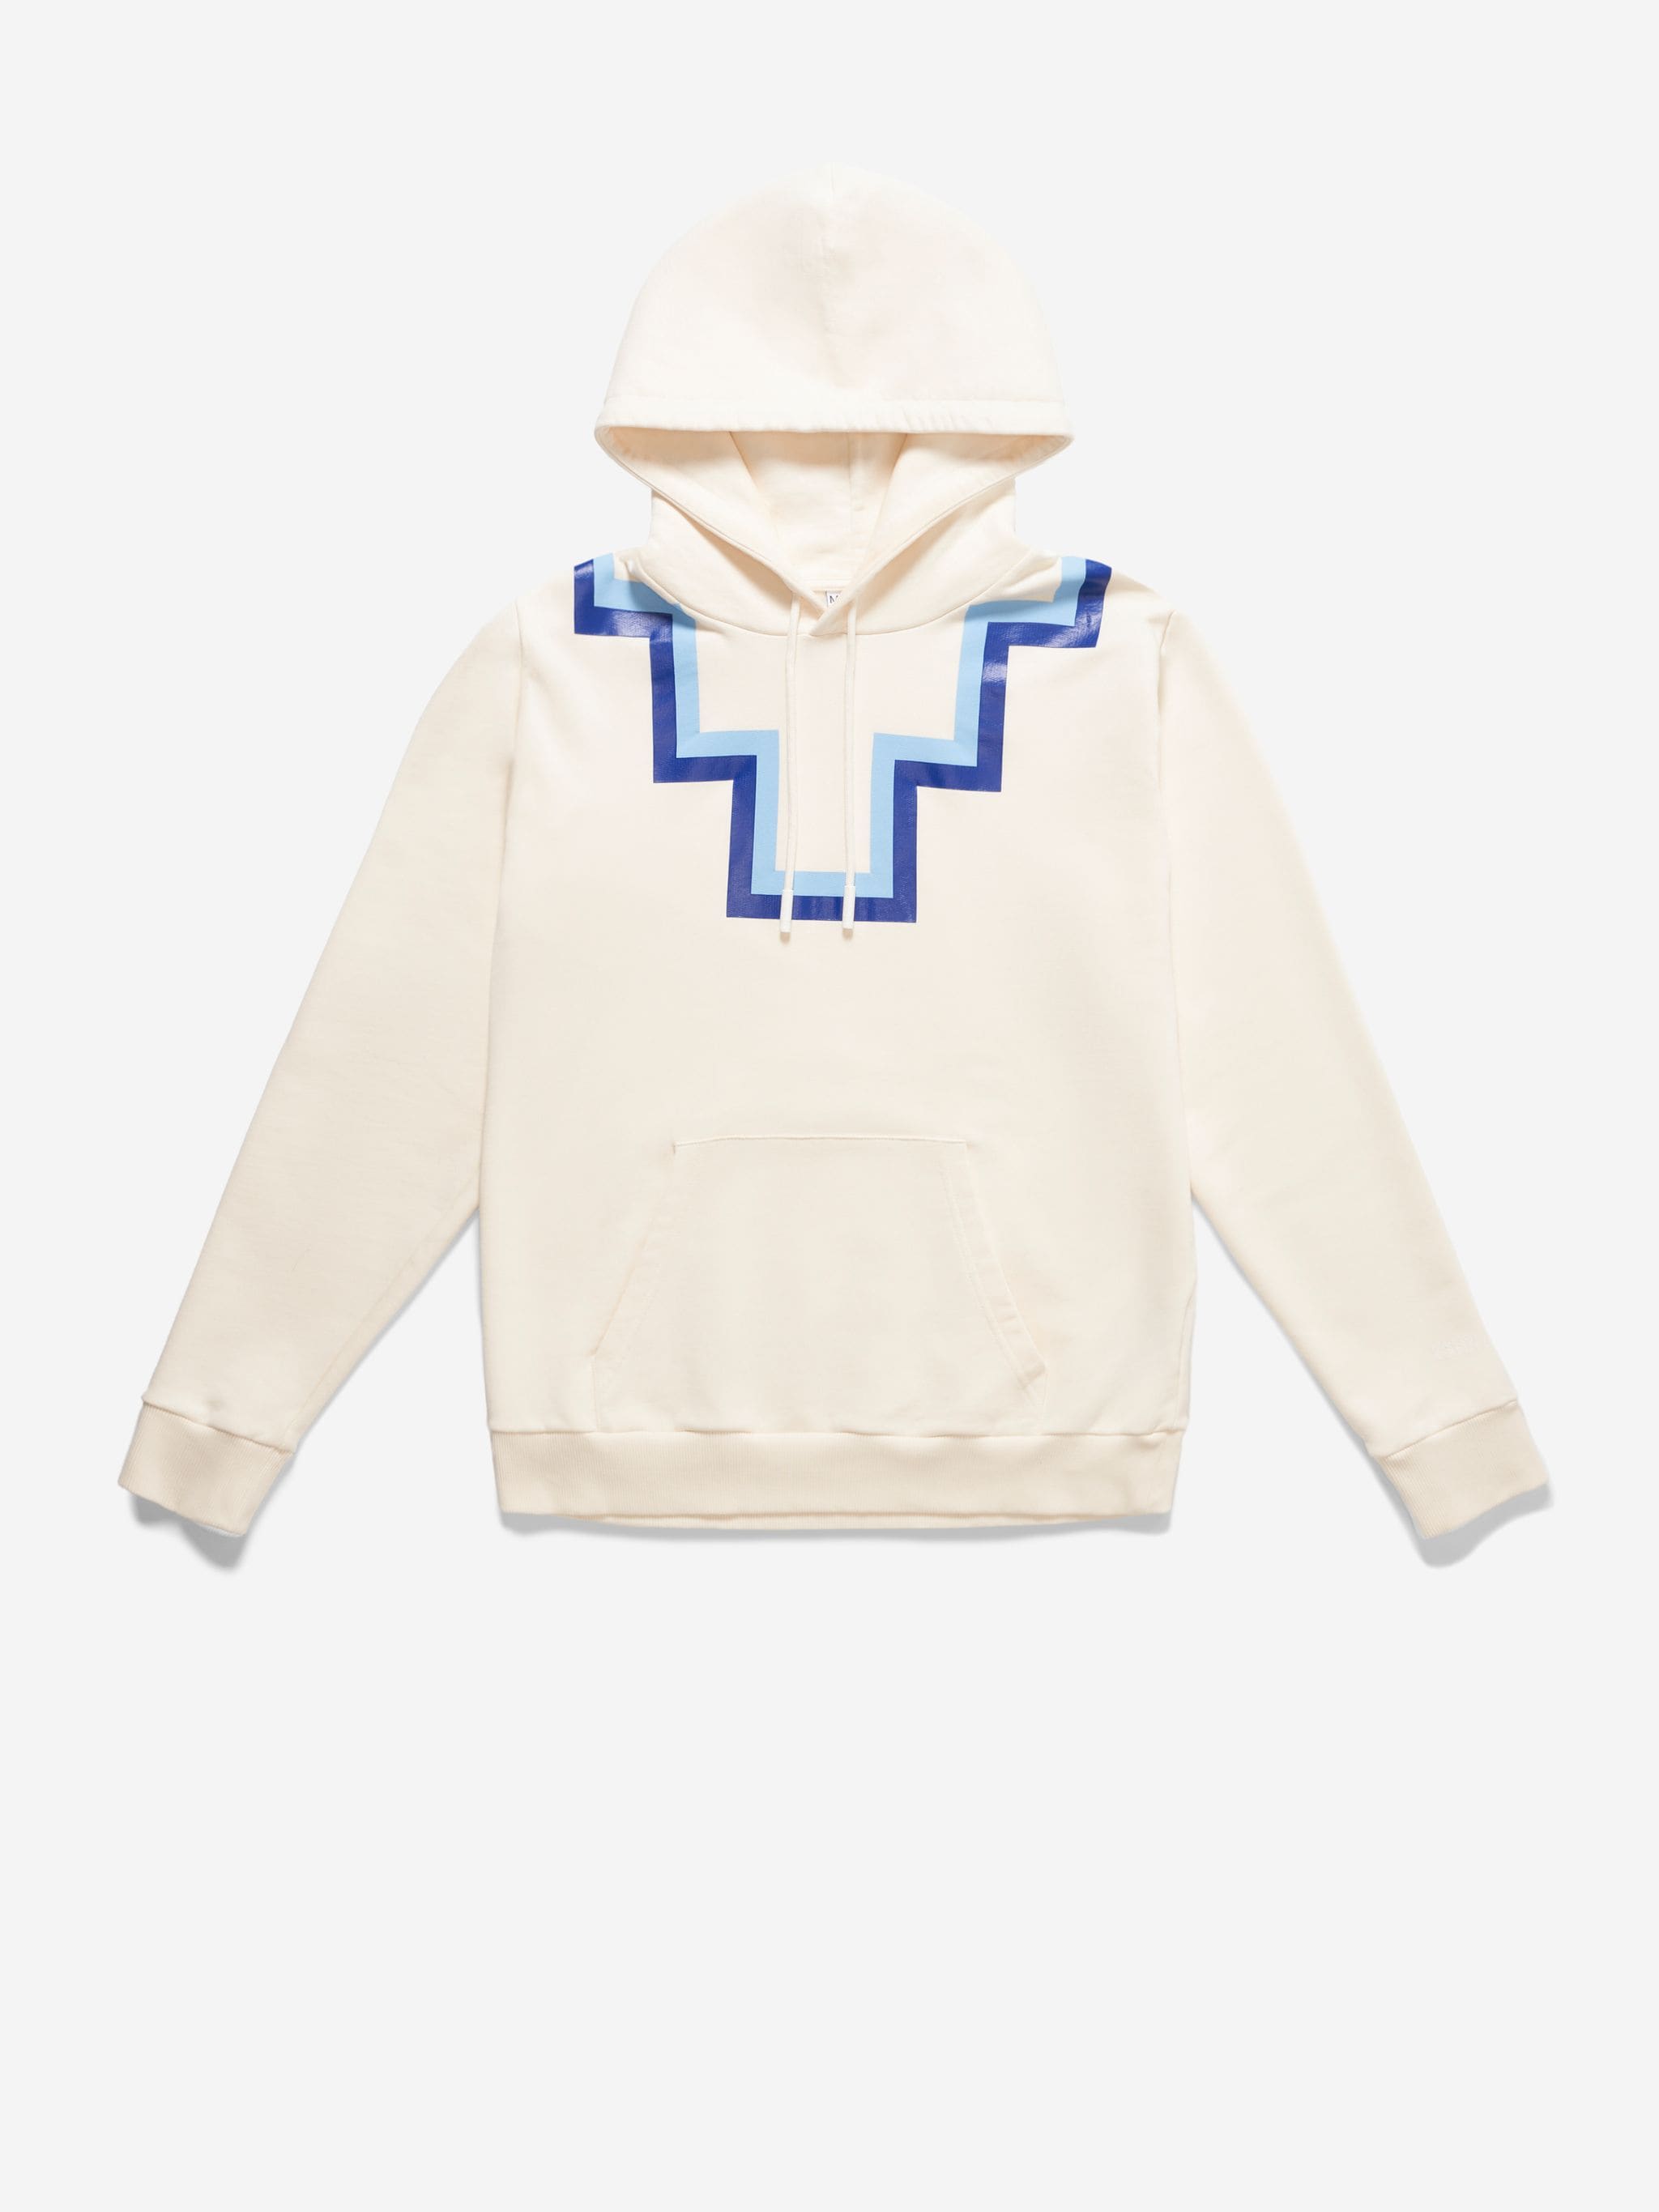 Ecru white cotton rural cross hooded sweatshirt from Marcelo Burlon County of Milan featuring crew neck, drawstring hood, front pouch pocket, straight hem and long sleeves.